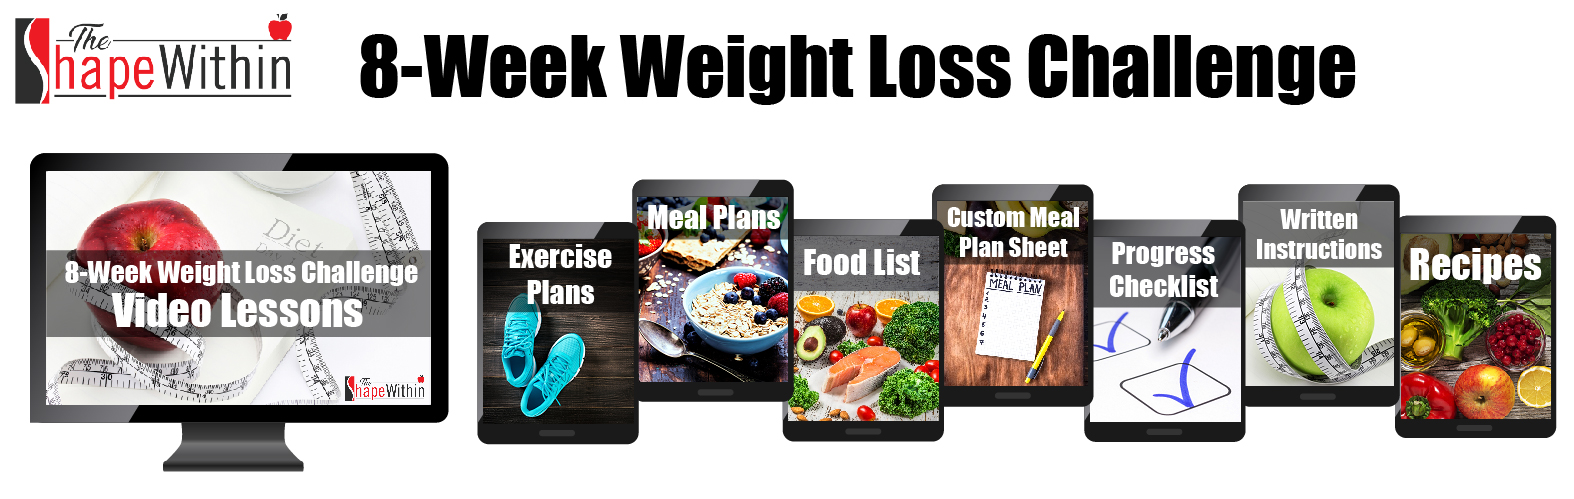 8-Week Weight Loss Challenge by Corey Bustos and TheShapeWithin.com